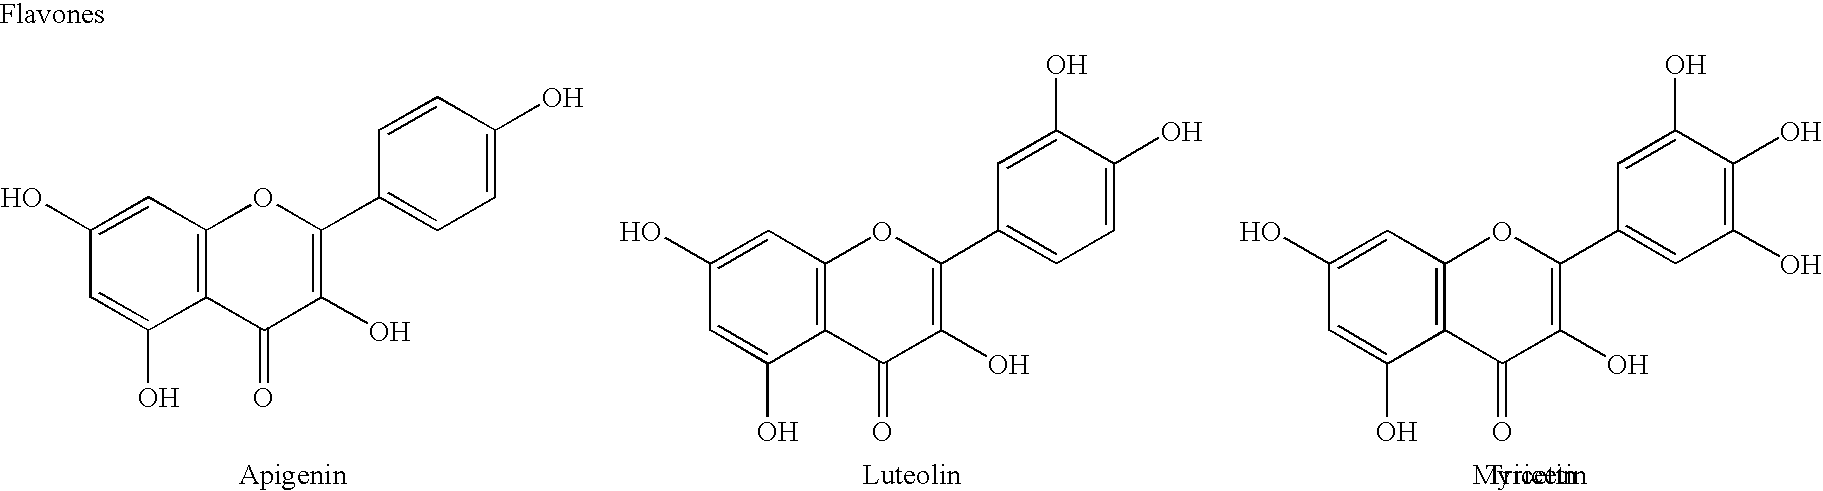 Rose containing flavone and delphinidin, and method for production thereof